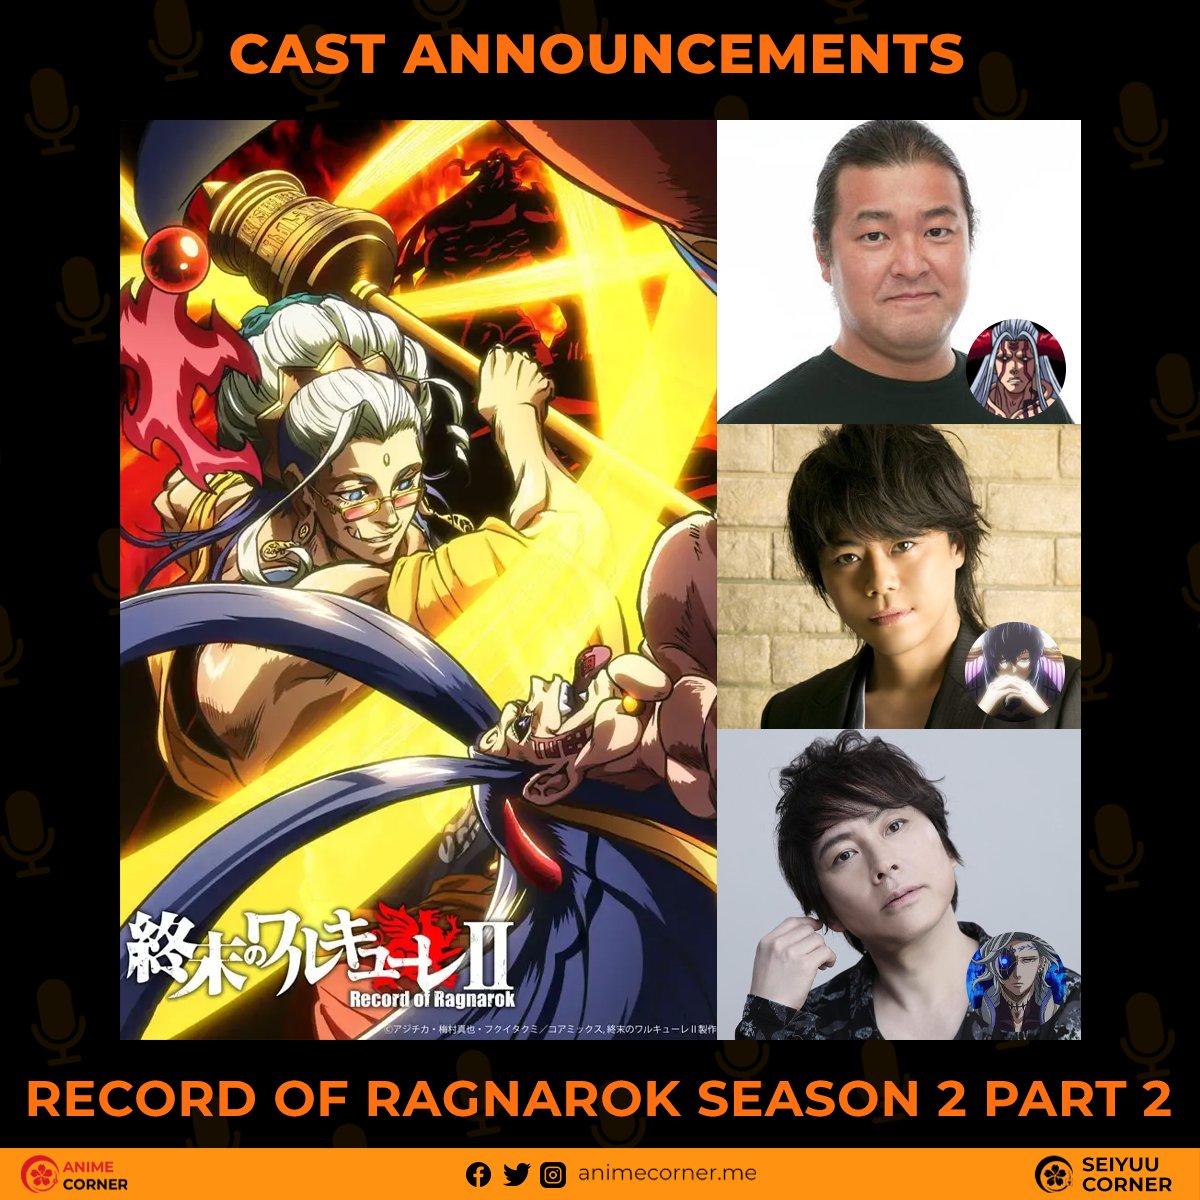 Record of Ragnarok season 2 Part 2 To Be Released On Netflix Soon